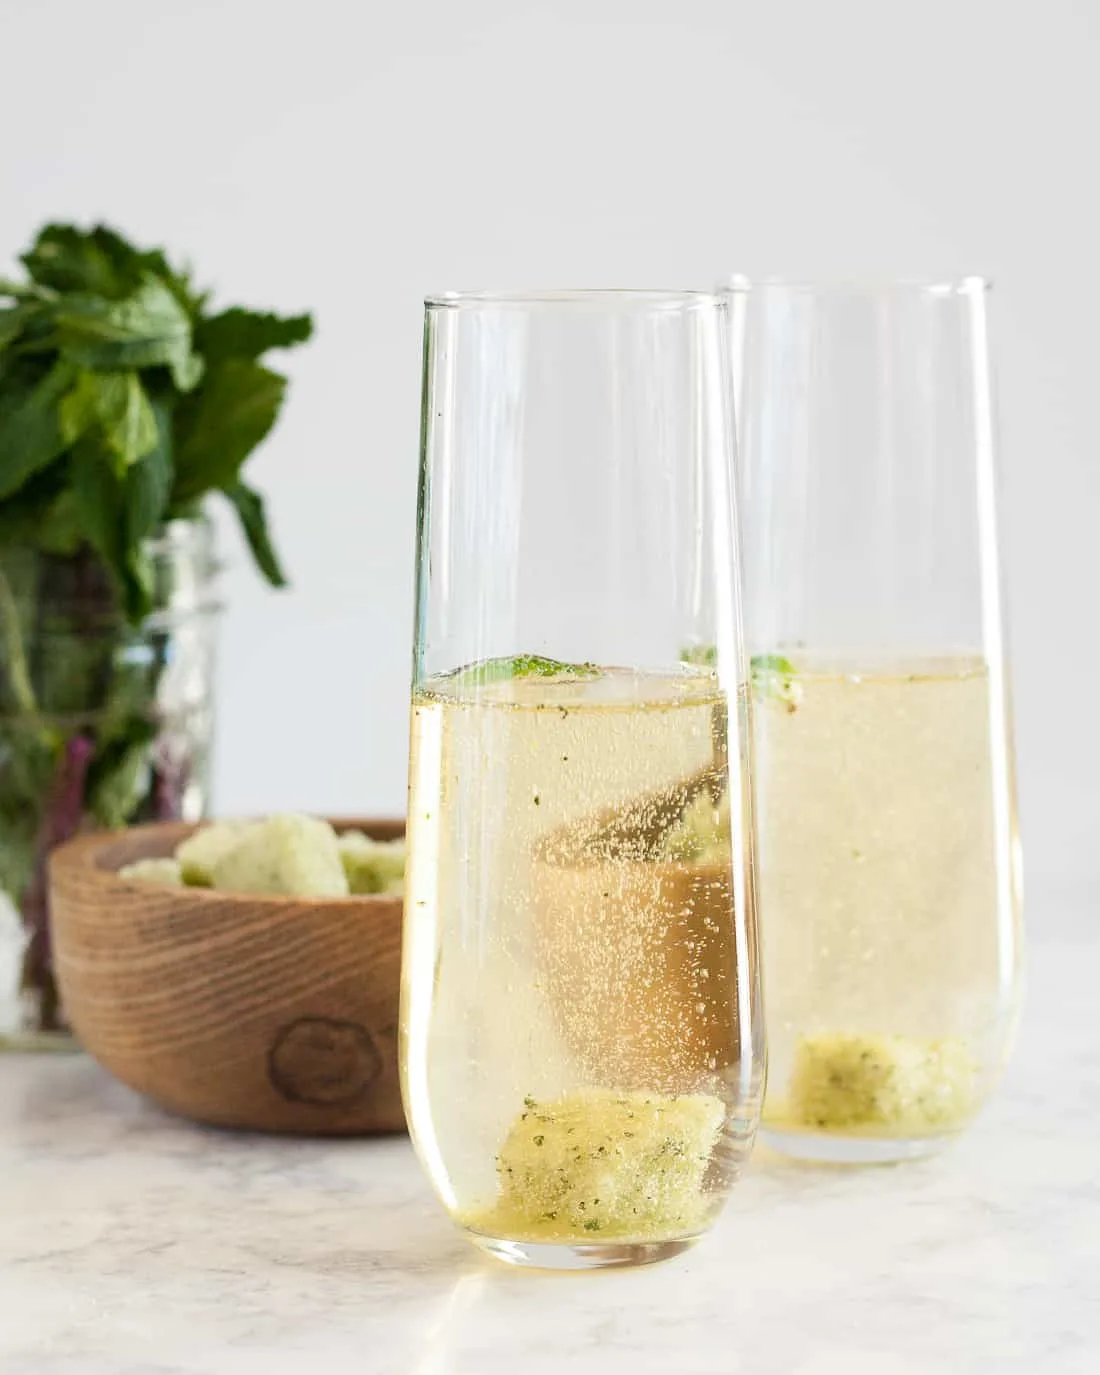 Whether you make it as a cocktail or a mocktail, this sparkling mint julep is a lovely drink for a celebration! Large hats optional. * Recipe on GoodieGodmother.com